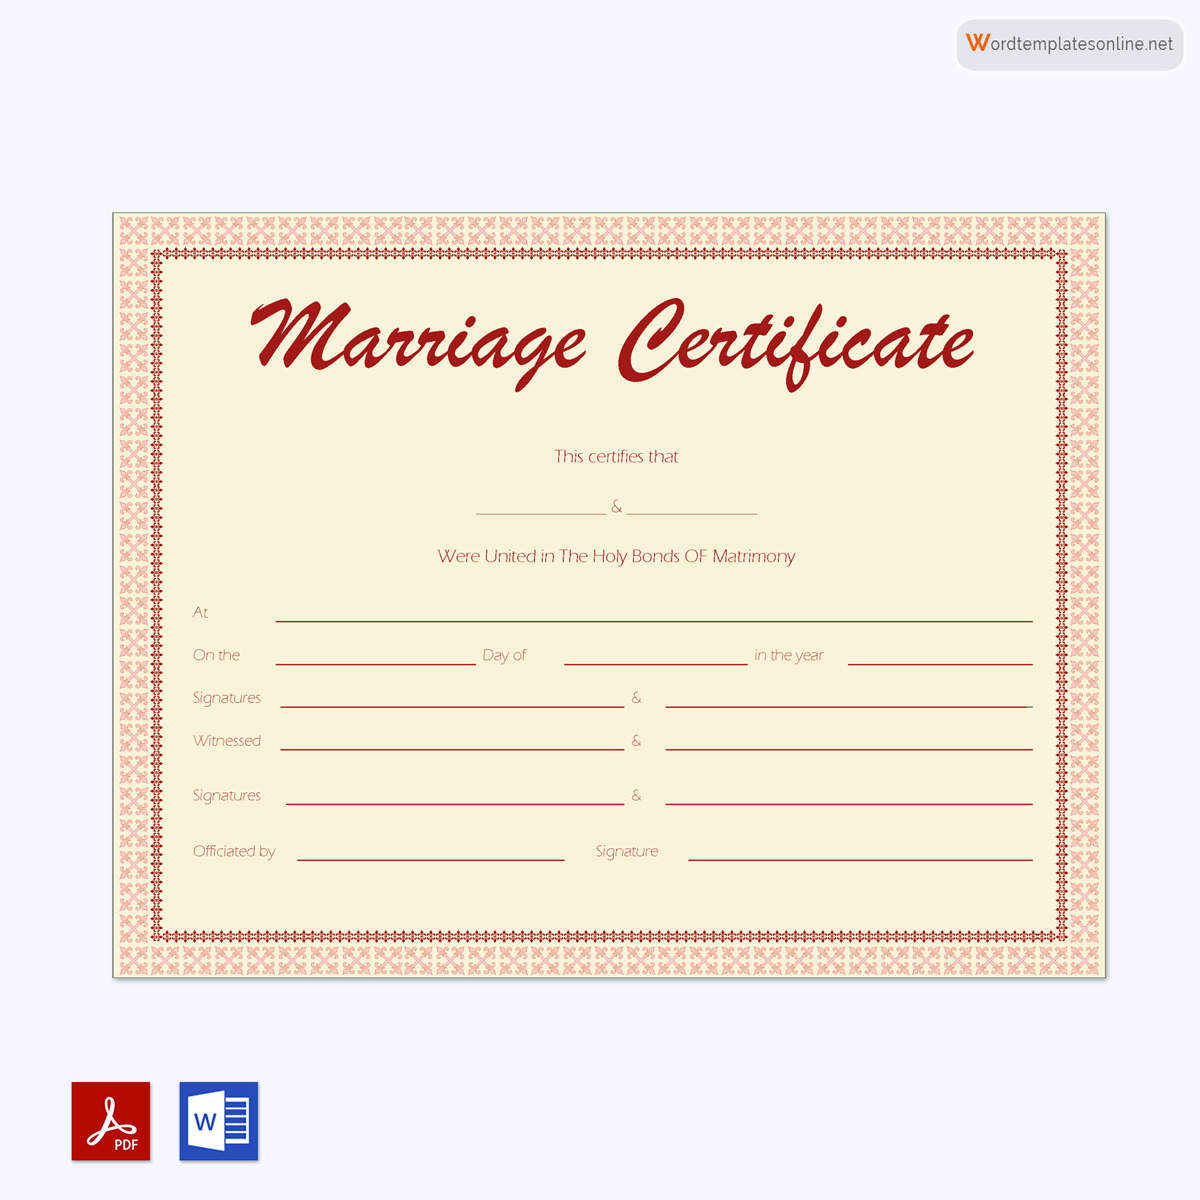  marriage certificate online fake 451